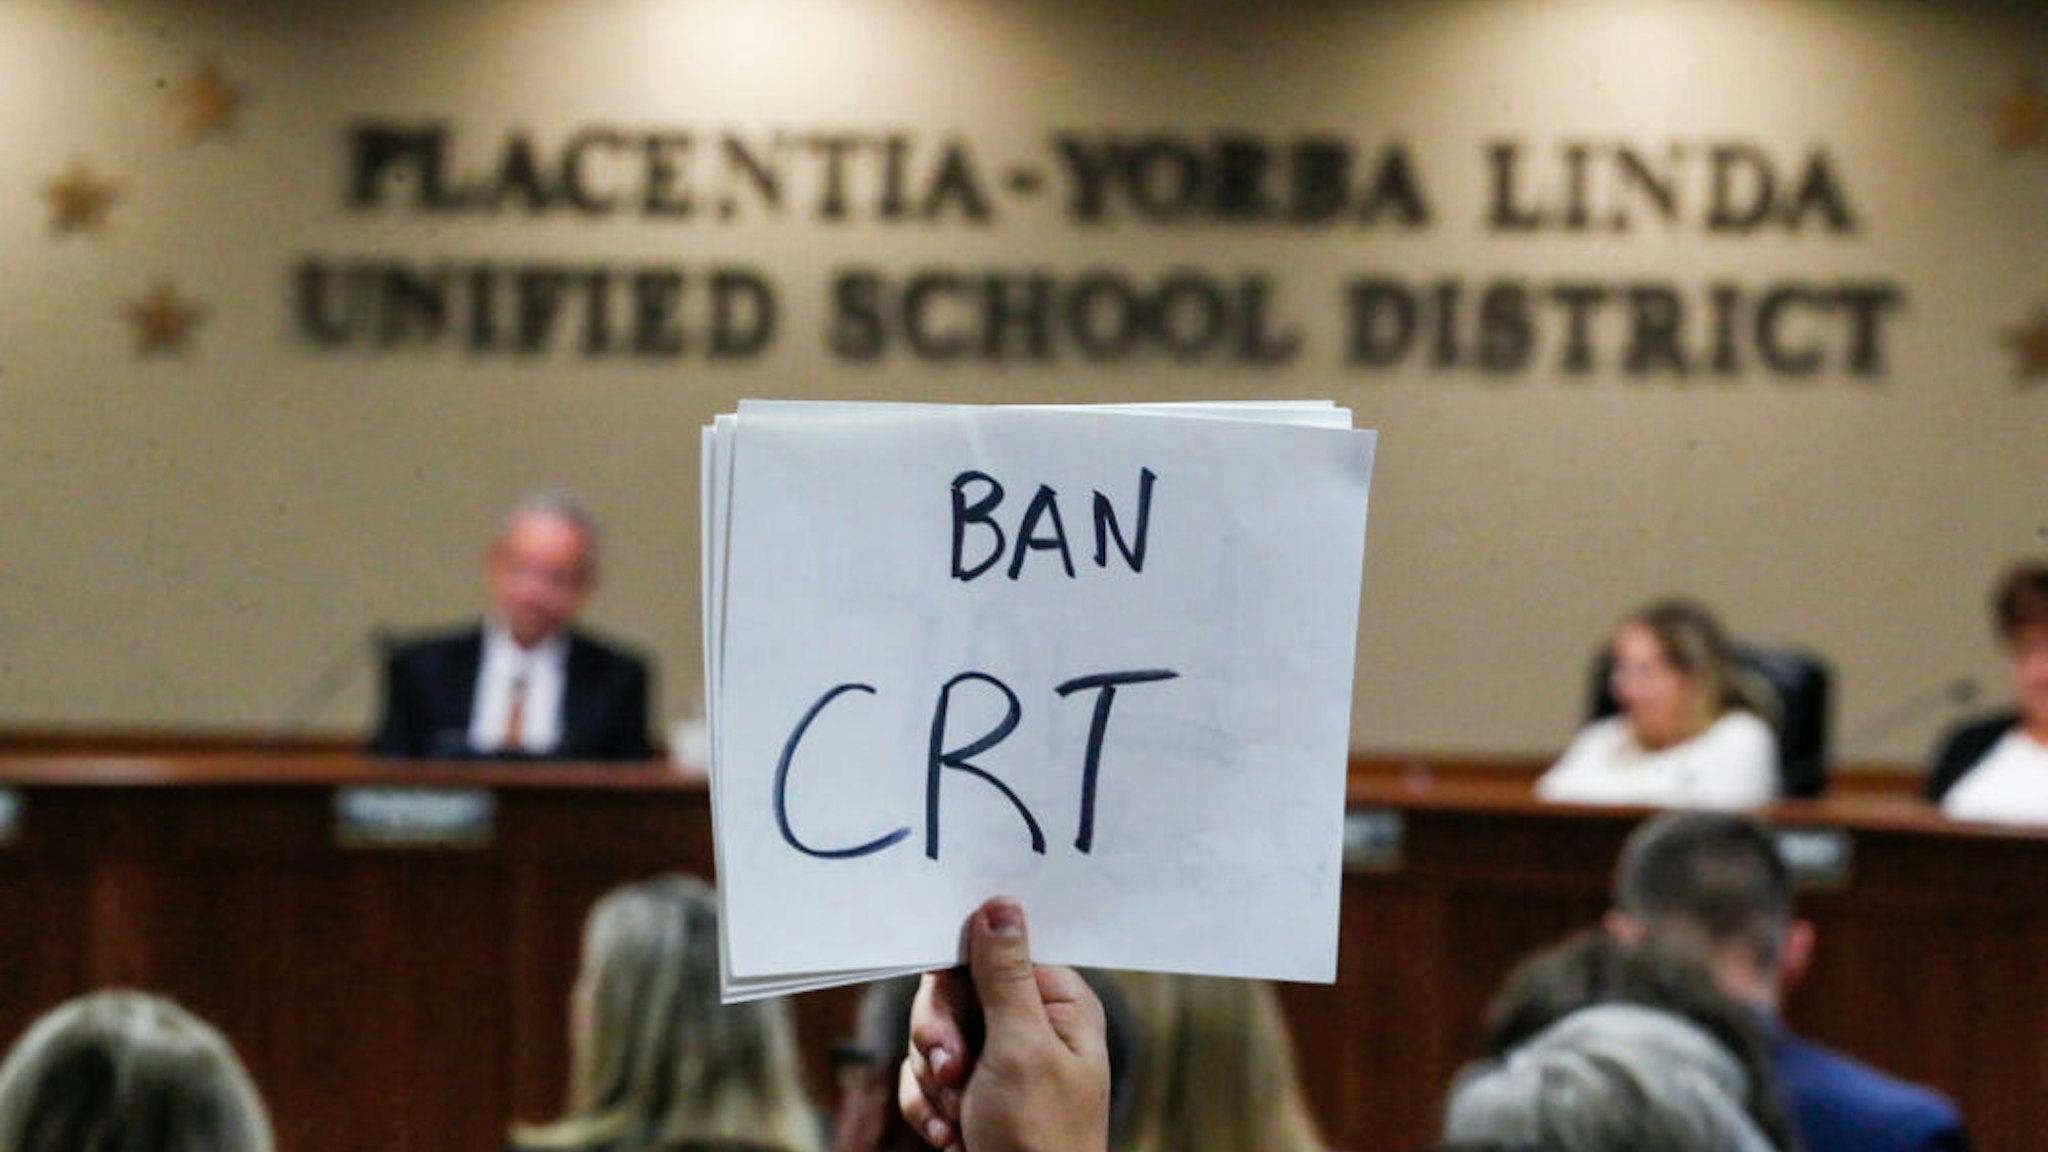 Yorba Linda, CA, Tuesday, November 16, 2021 - The Placentia Yorba Linda School Board discusses a proposed resolution to ban teaching critical race theory in schools.